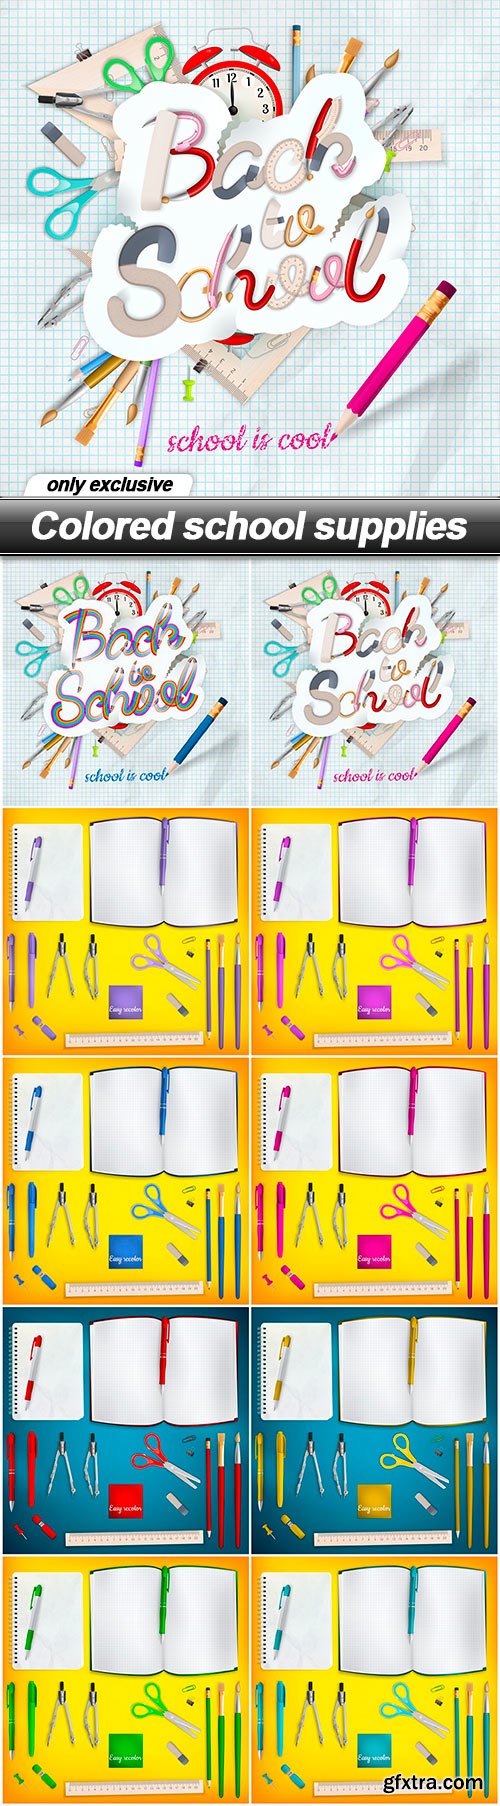 Colored school supplies - 10 EPS